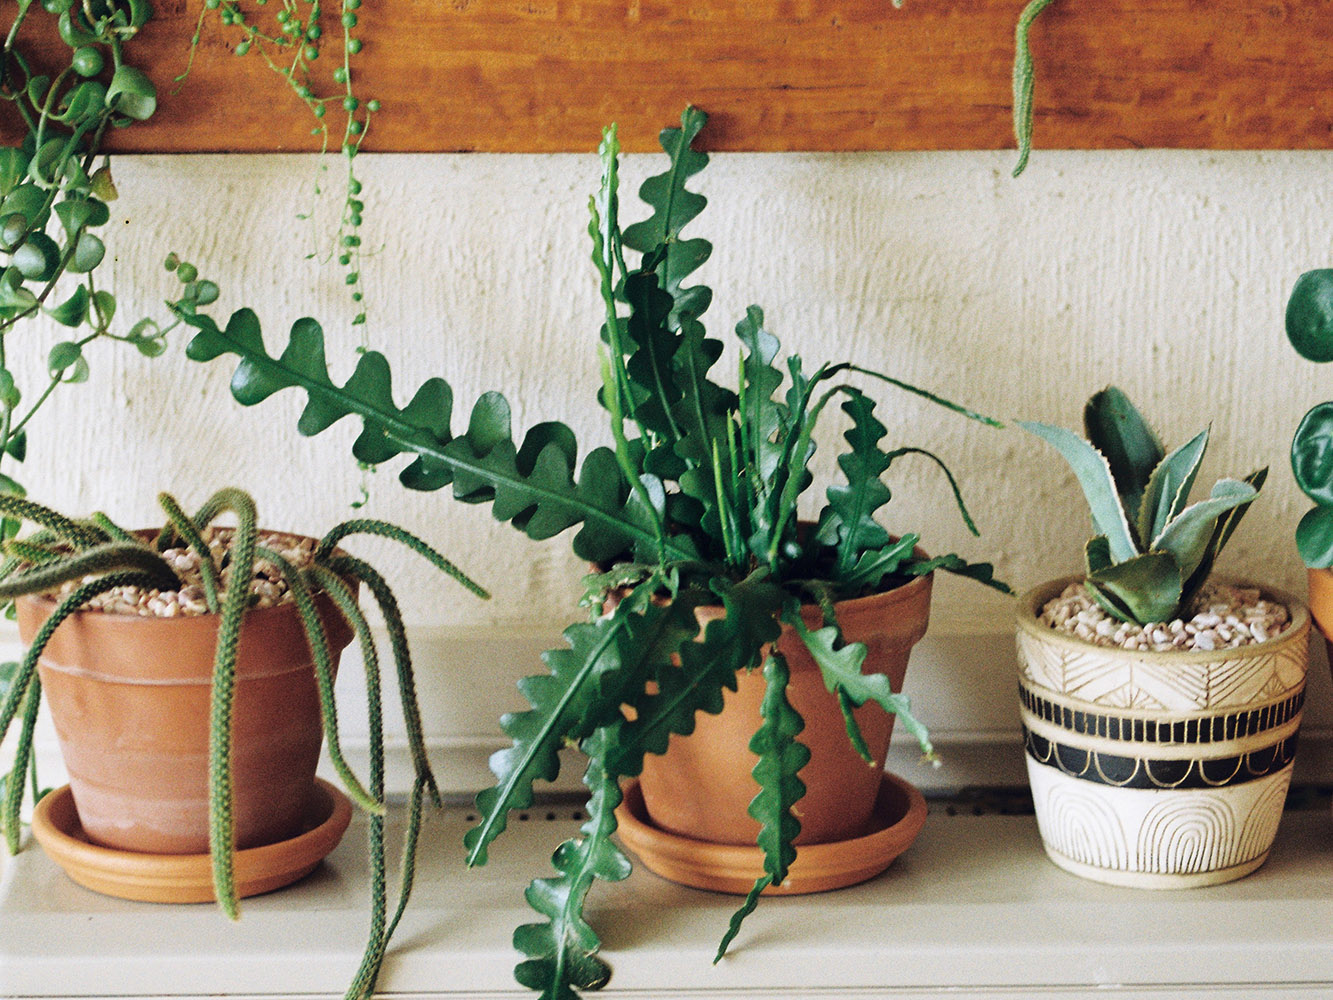 5 Plant Care Tips from an Expert